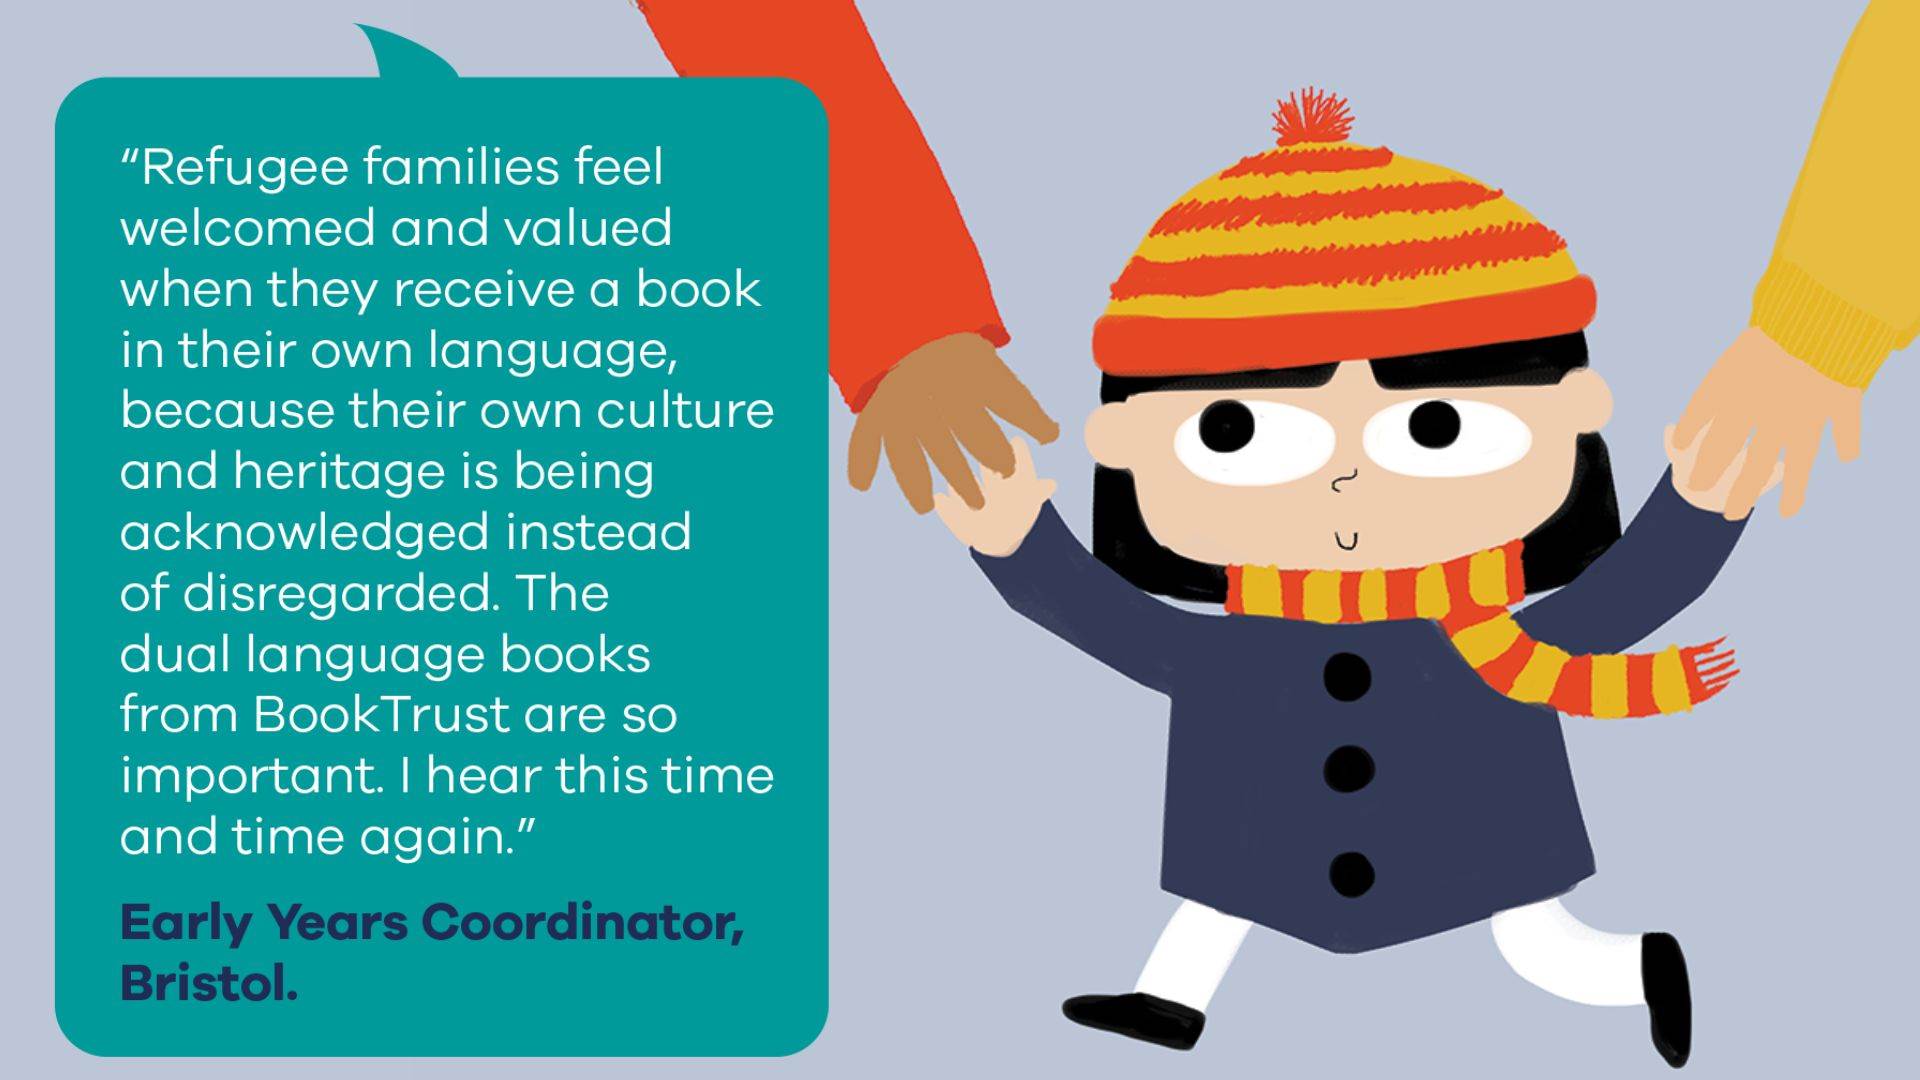 "Refugee families feel welcomed and valued when they received a book in their own language, because their own culture and heritage is being acknowledged instead of disregarded. The dual language books from BookTrust are so important. I hear this time and time again." Early Years Coordinator, Bristol. Illustration: Nadia Shireen